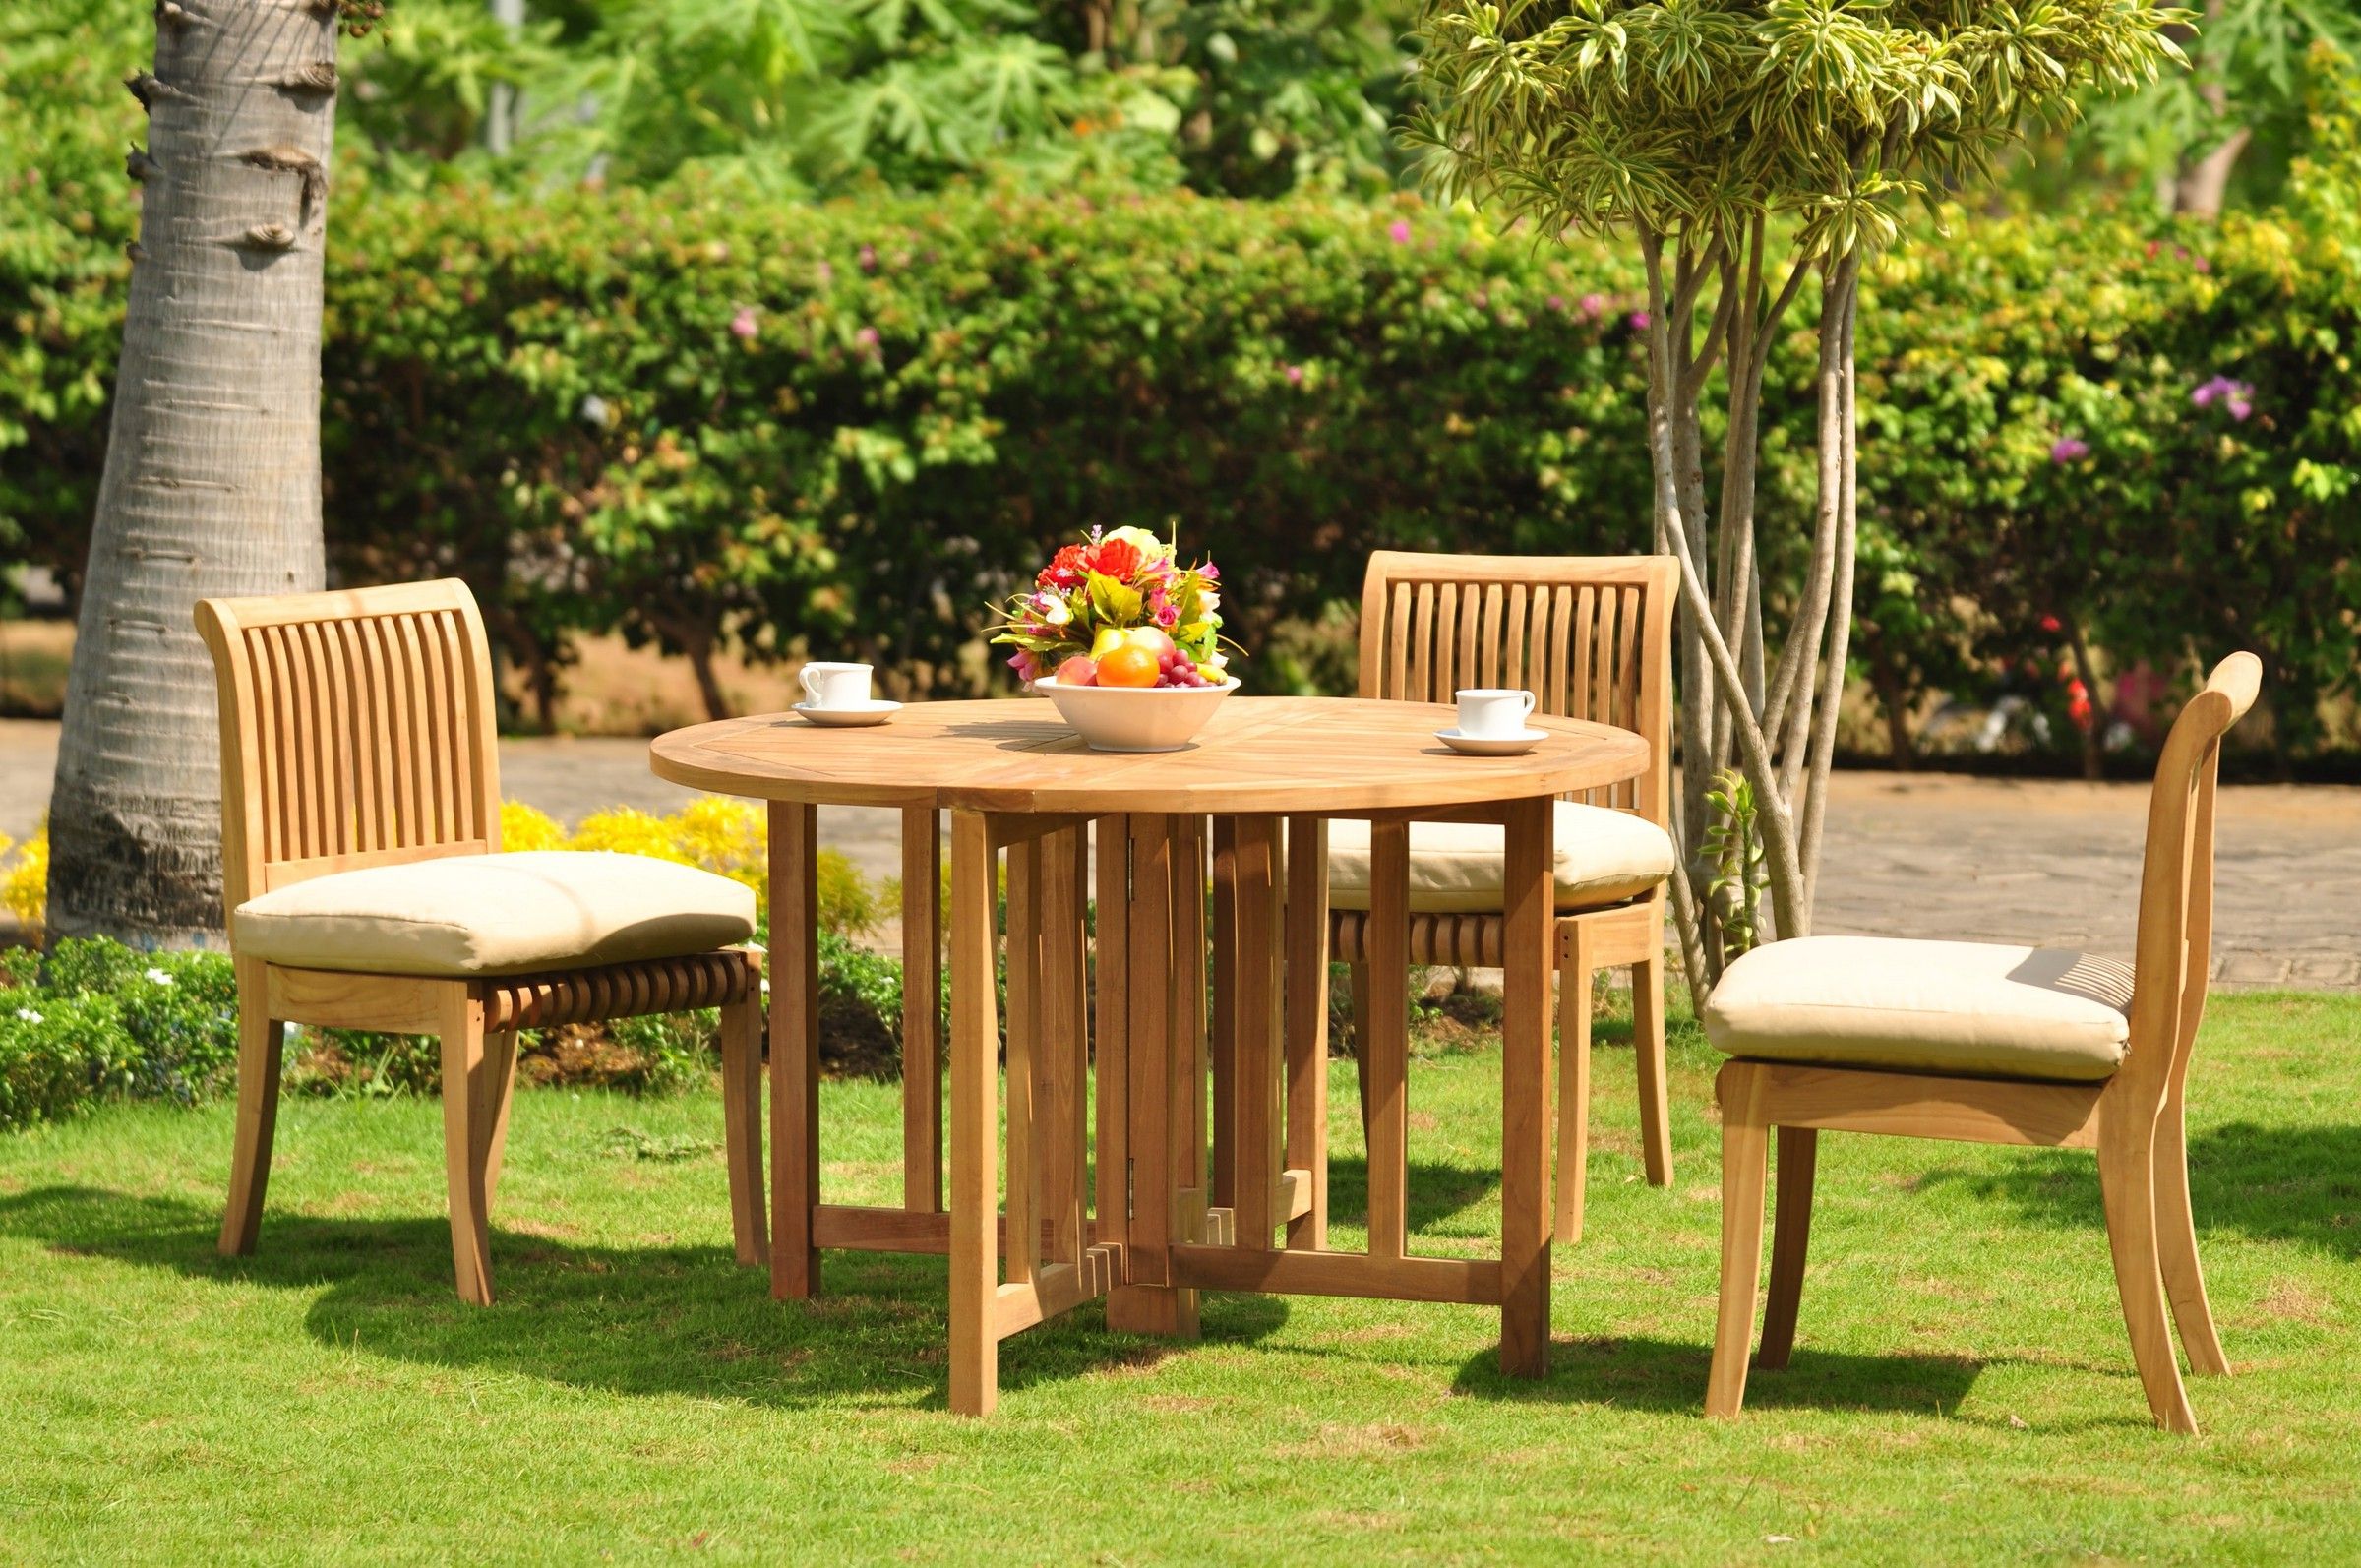 Popular Teak Dining Set: 3 Seater 4 Pc: 48" Round Butterfly Folding Table And 3 Inside Teak Armchair Round Patio Dining Sets (View 10 of 15)